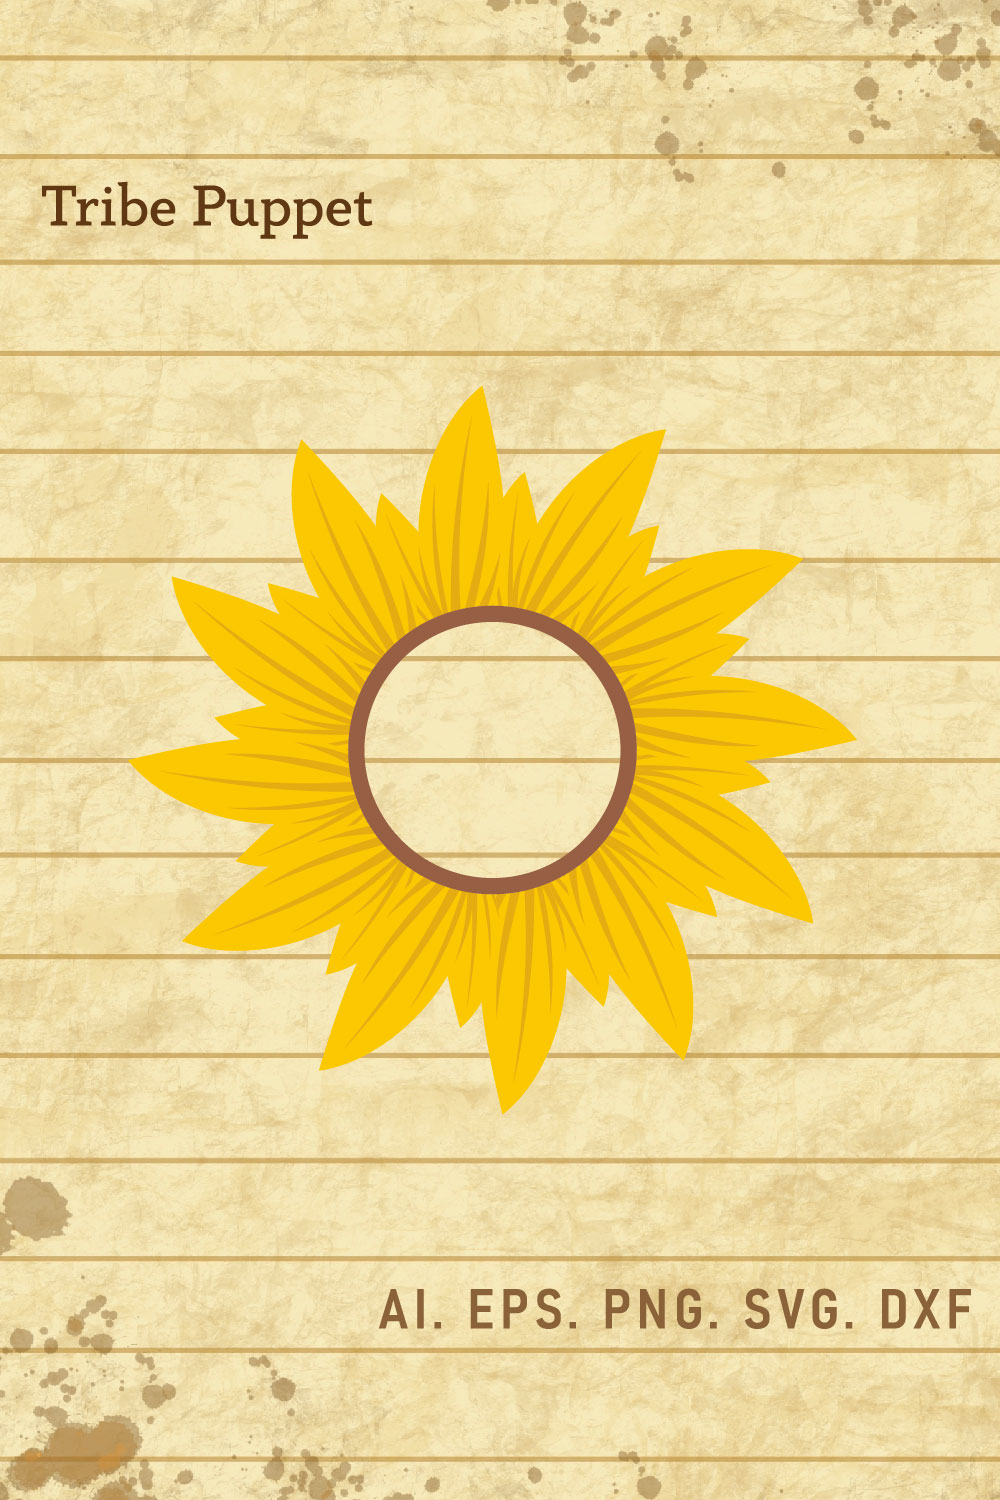 Sunflower 13 pinterest preview image.